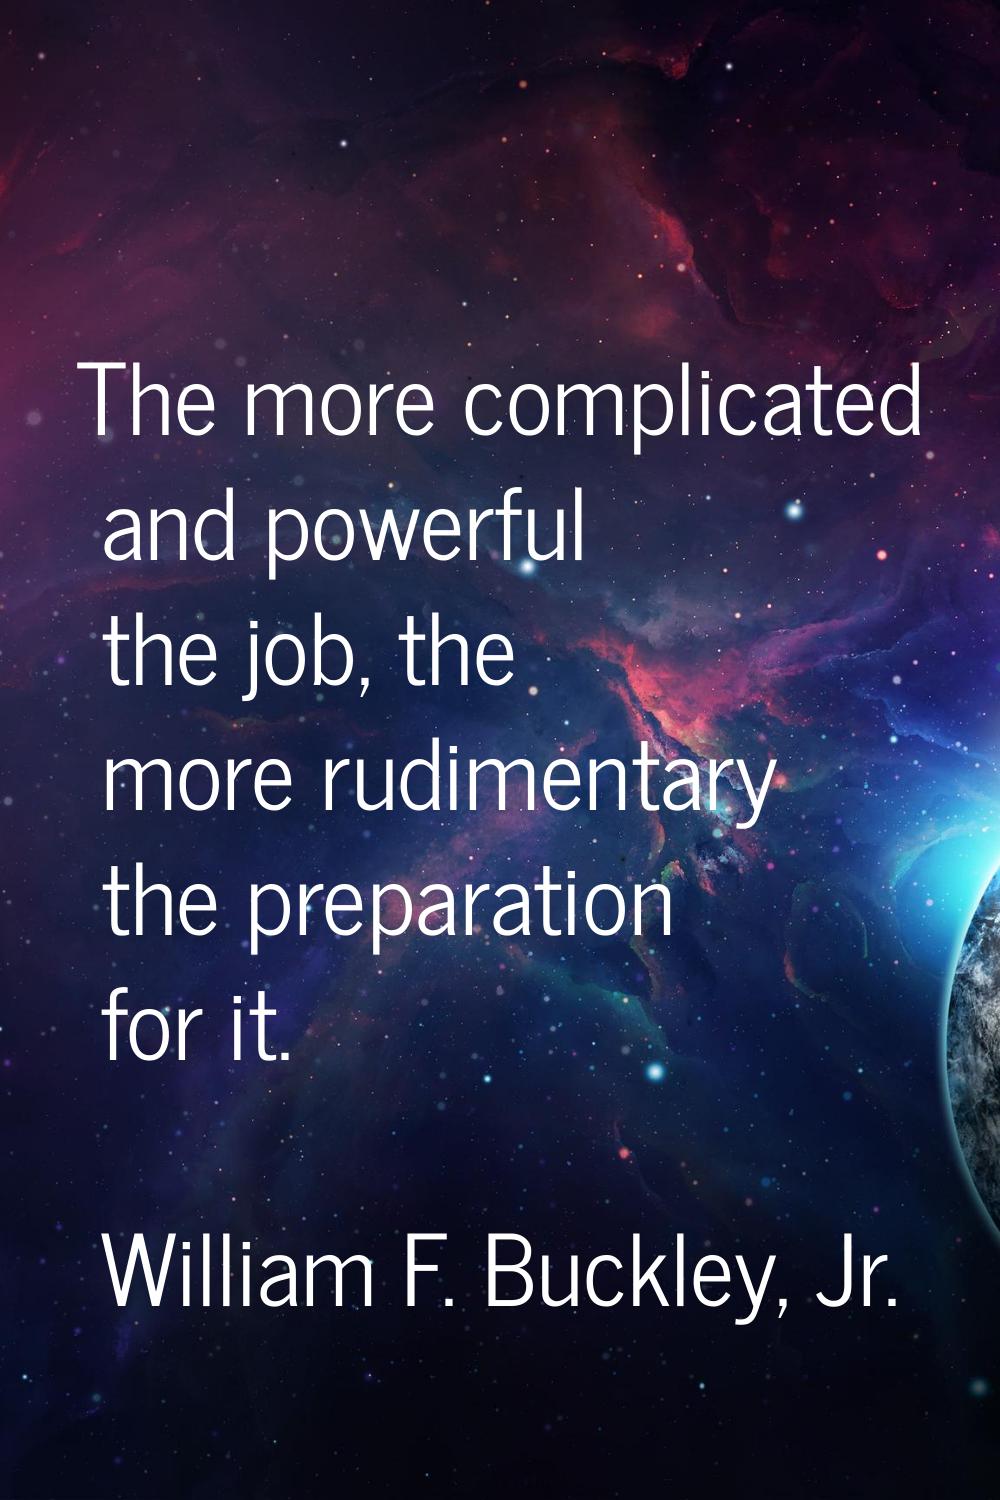 The more complicated and powerful the job, the more rudimentary the preparation for it.